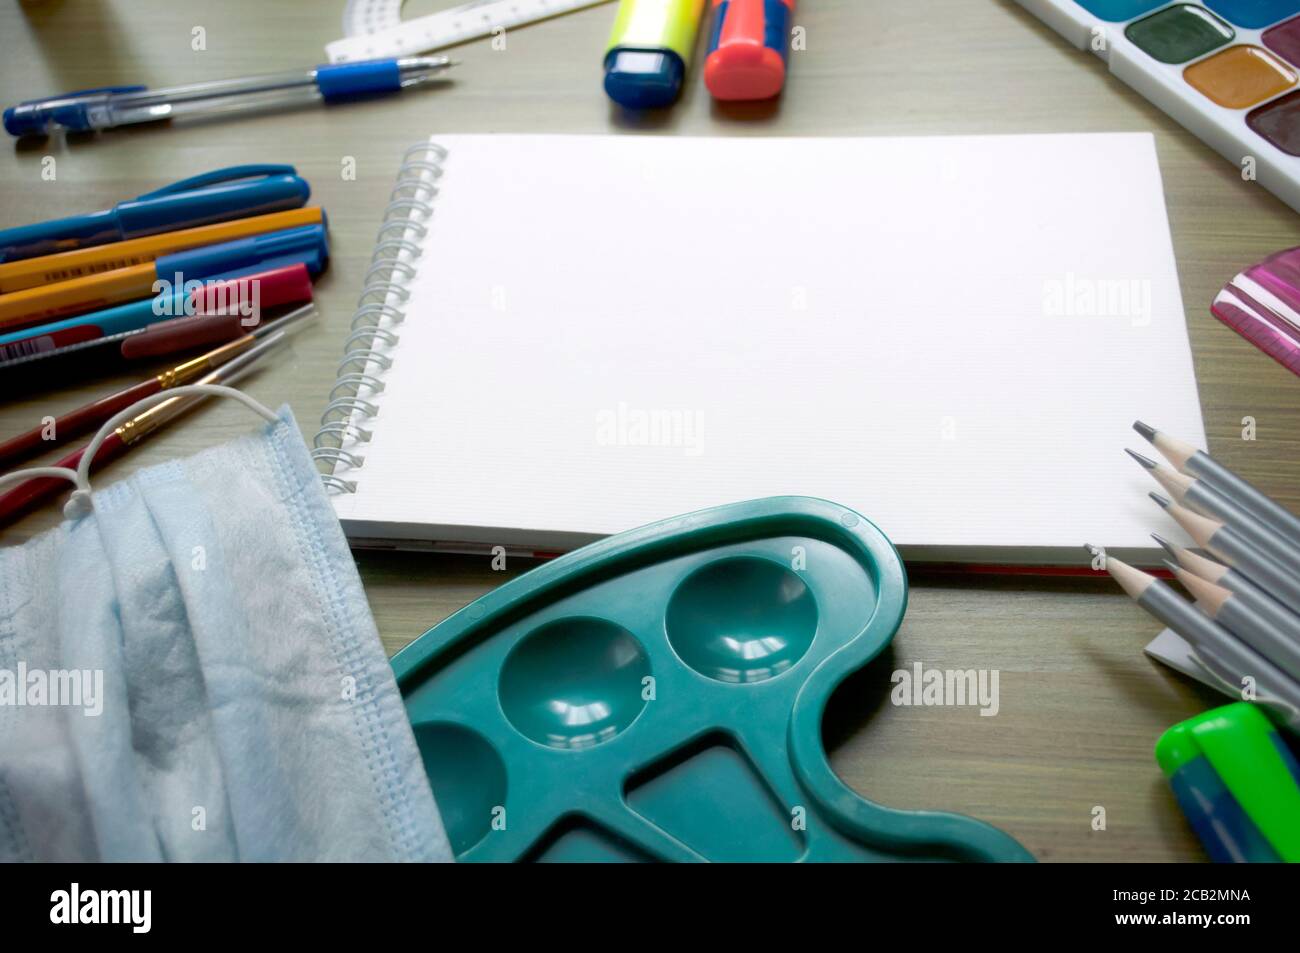 https://c8.alamy.com/comp/2CB2MNA/education-mockup-with-pupils-stationery-and-and-blank-sheet-of-white-sketchbook-paper-on-wooden-background-drawing-set-education-concept-2CB2MNA.jpg